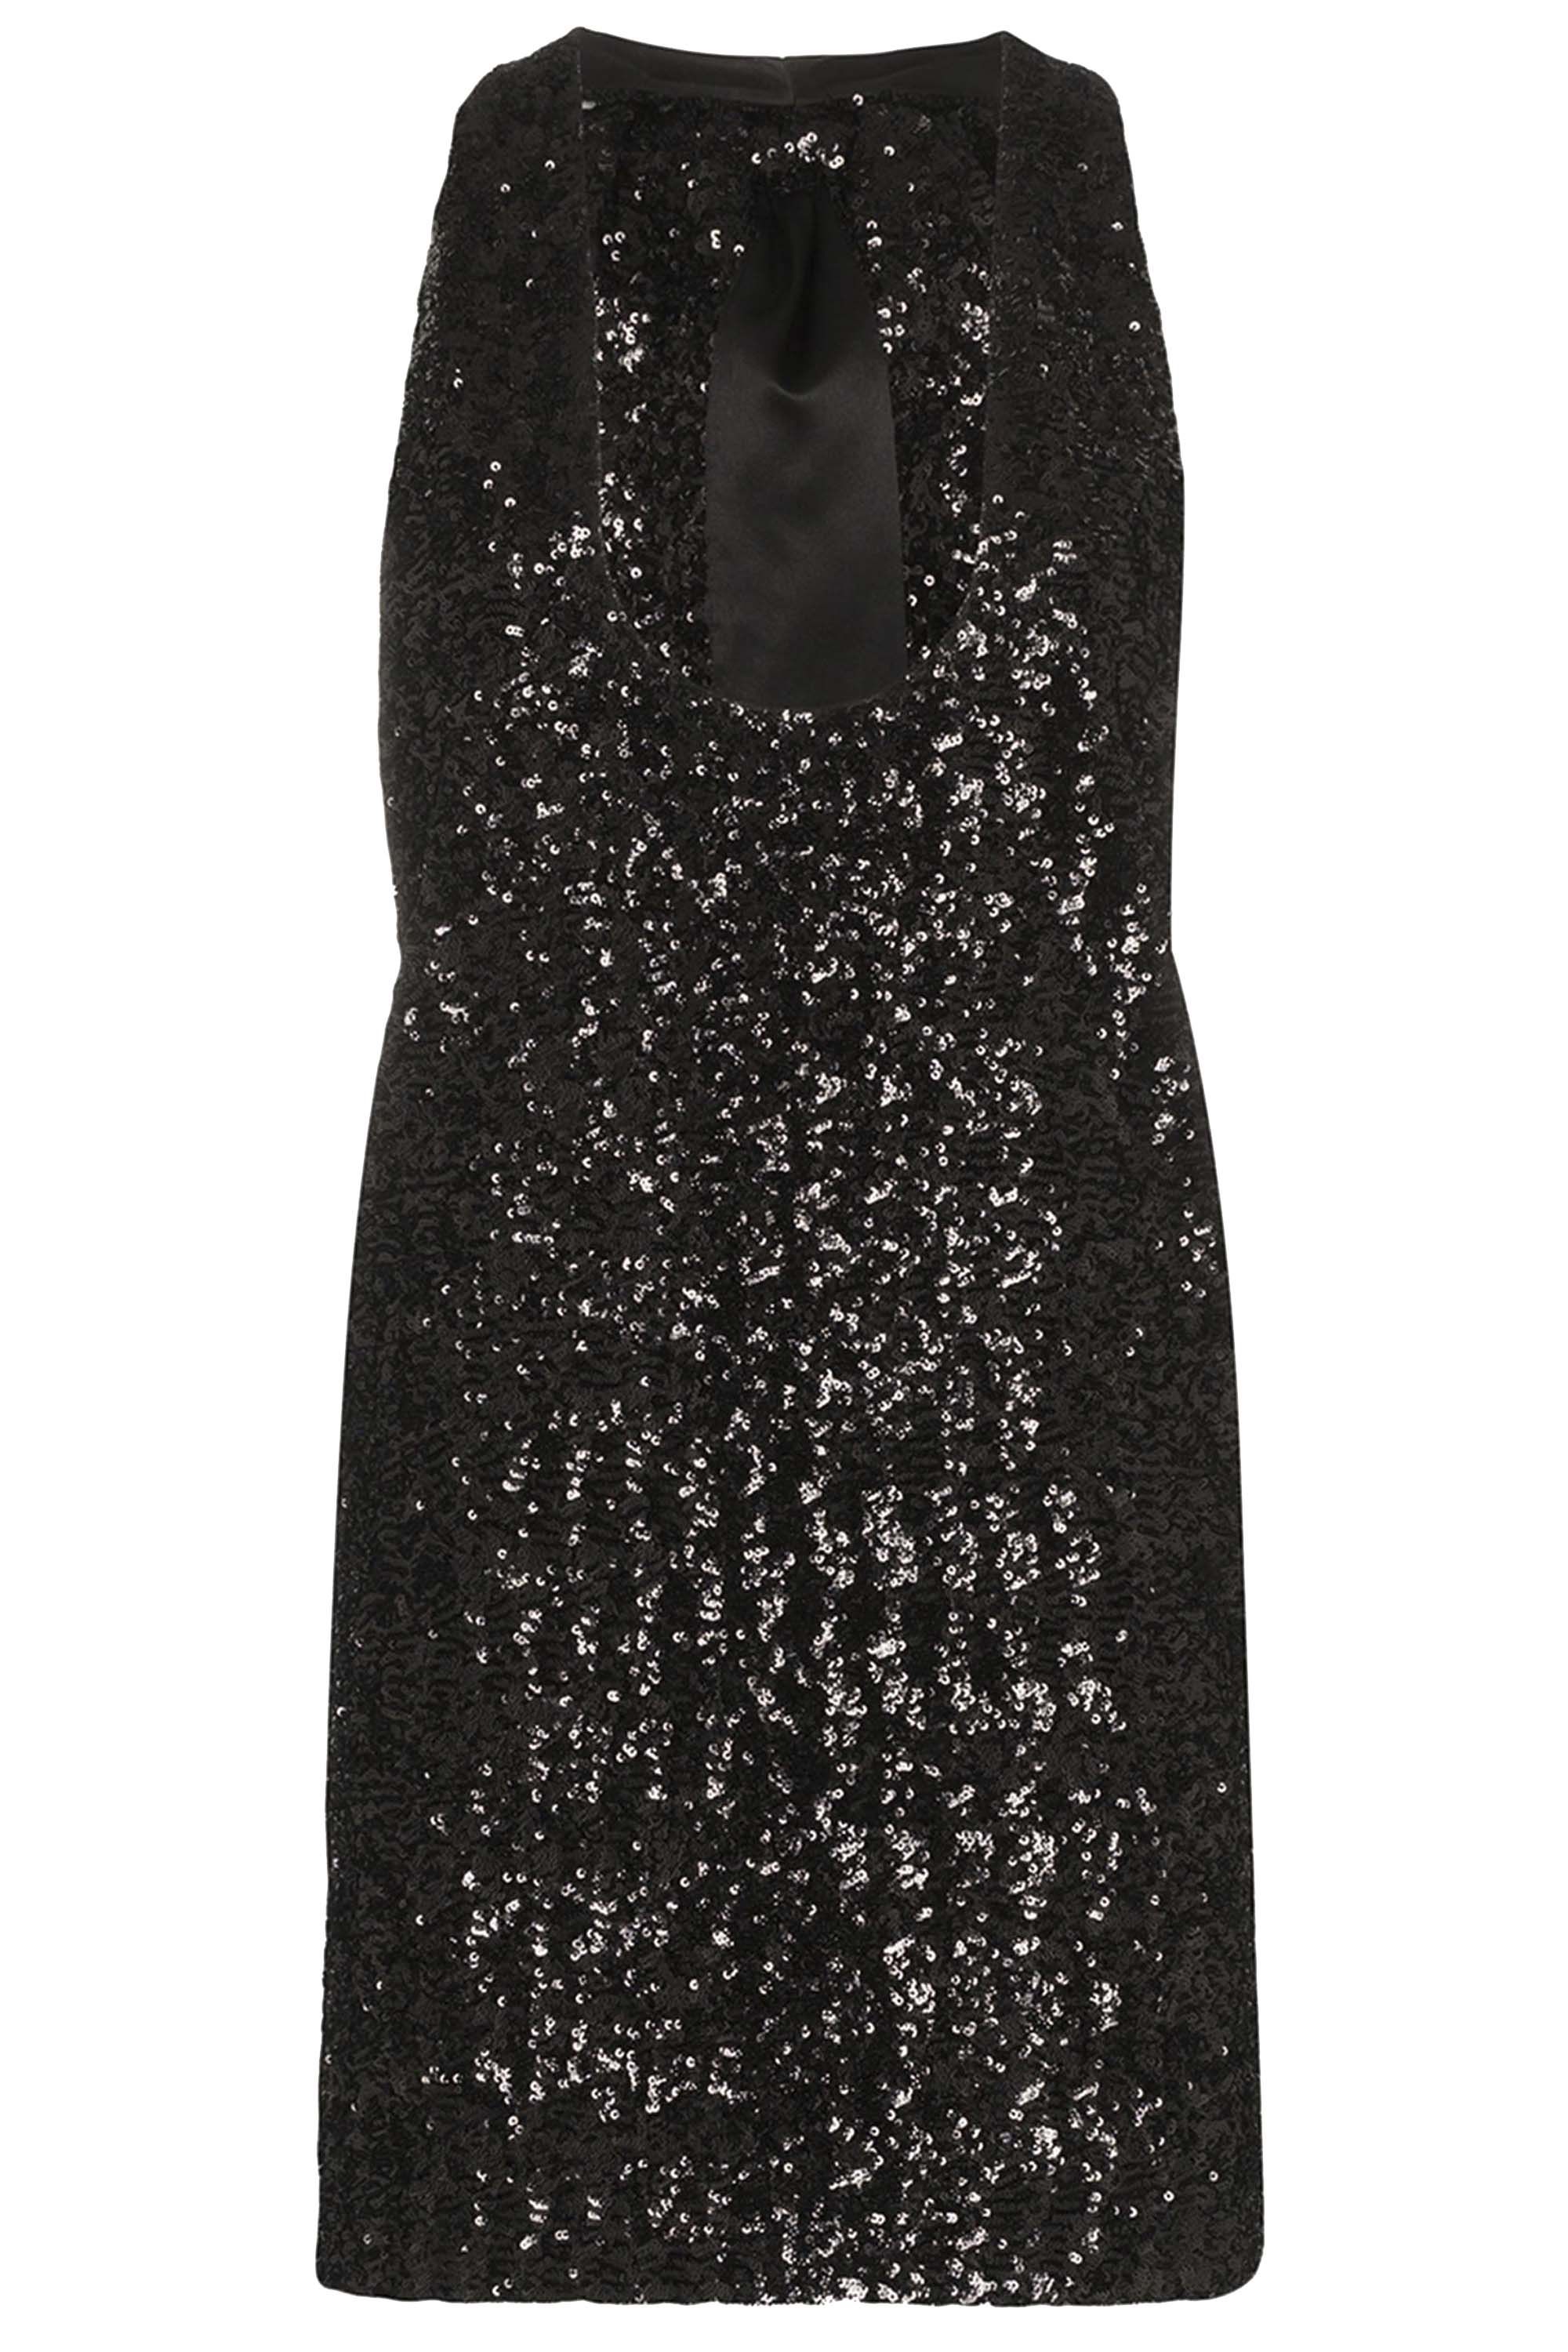 black sparkly dress outfit